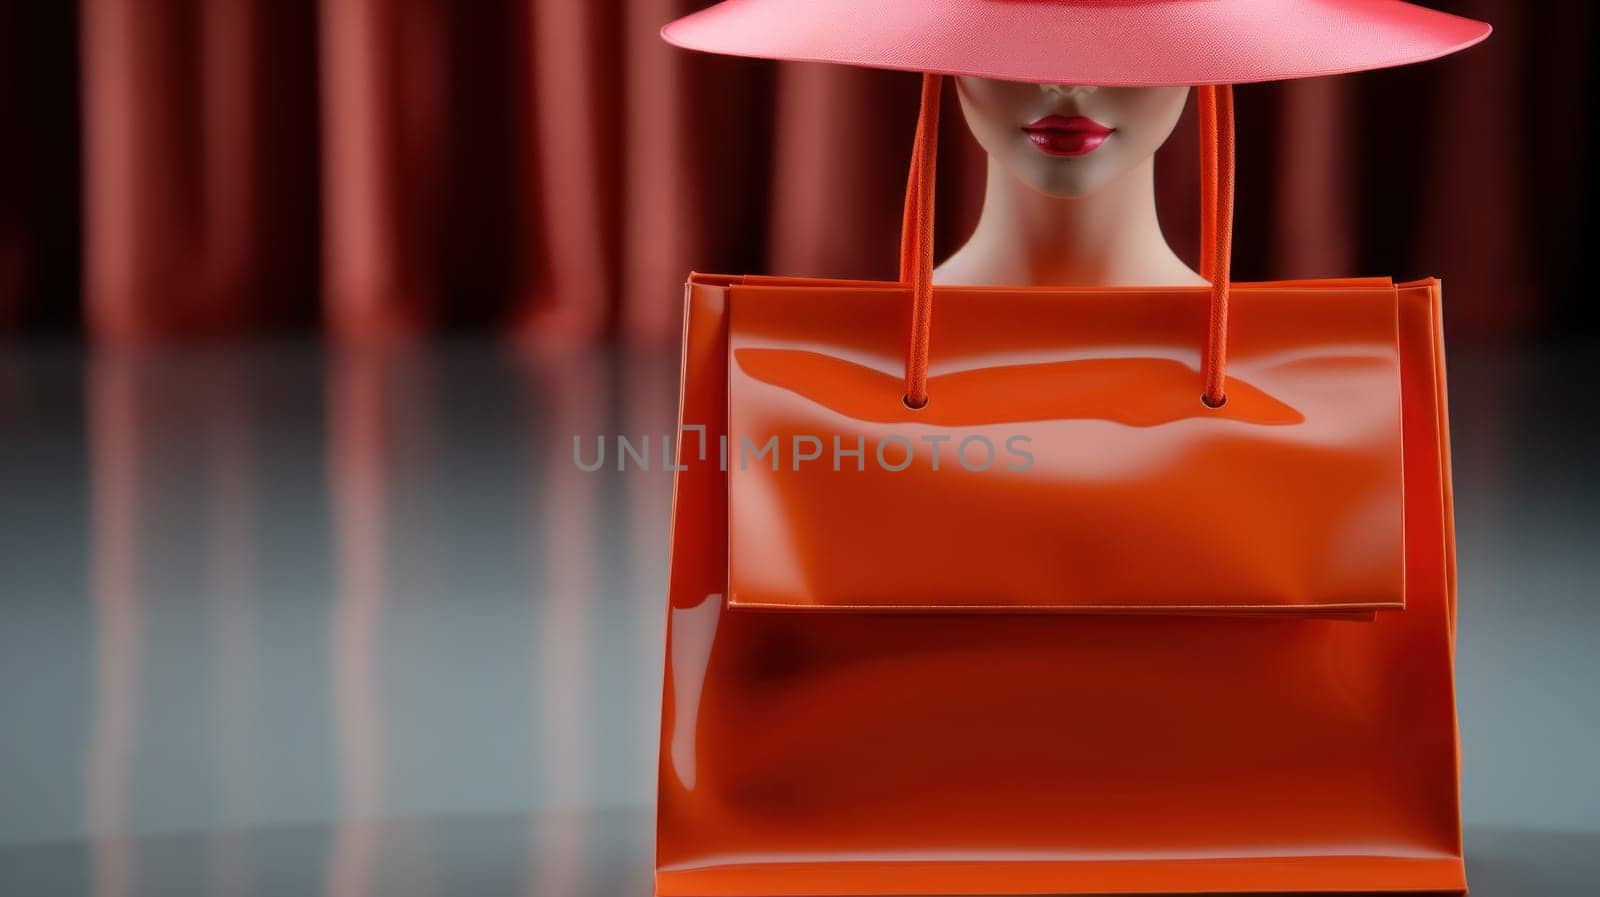 A mannequin head with a red hat and orange bag